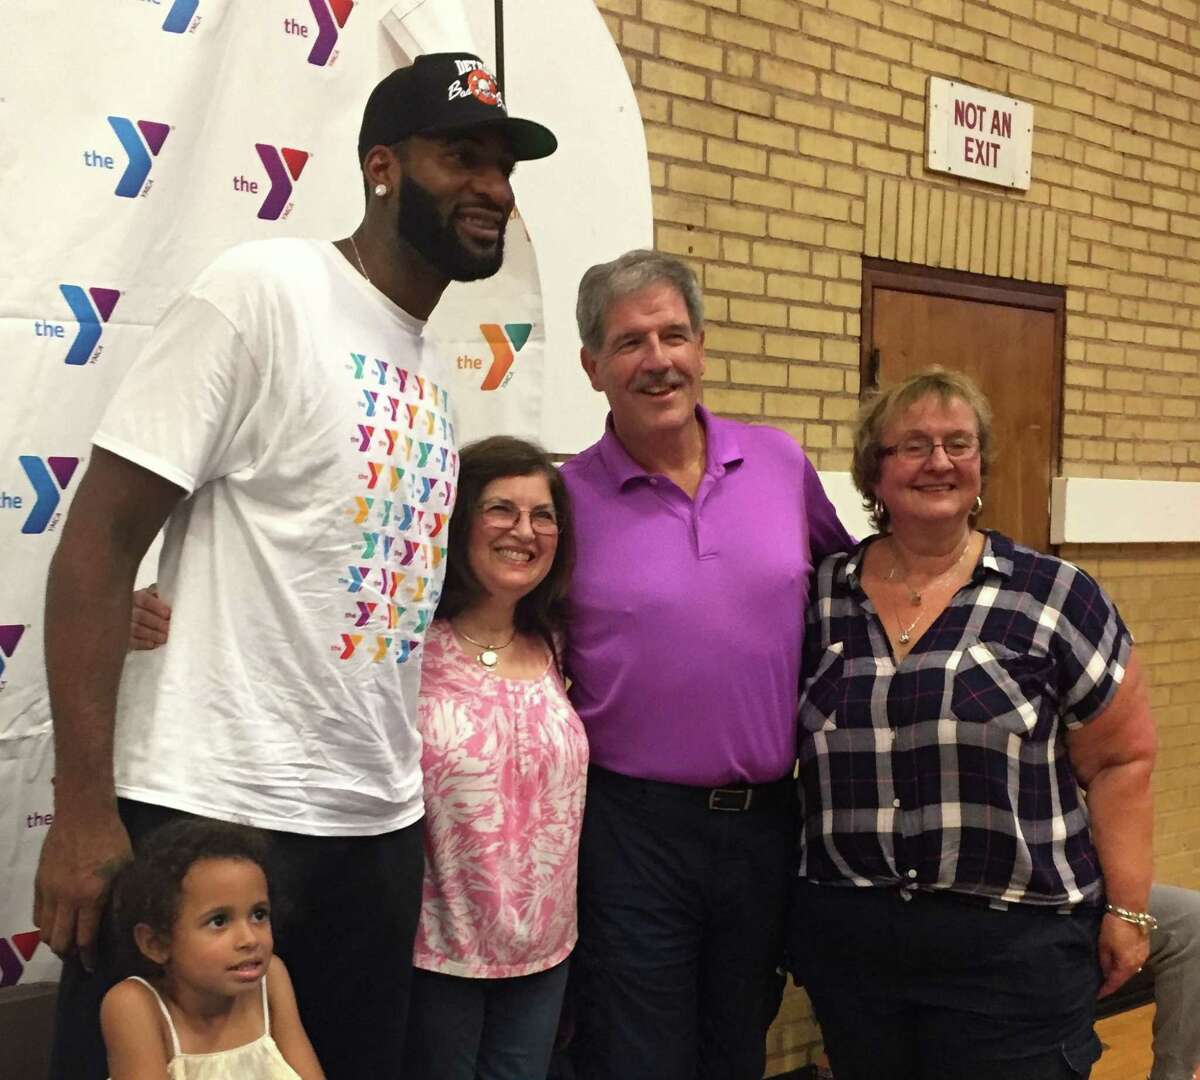 Middletown native and NBA center for the Detroit Pistons Andre Drummond is shown with his Bielefield Elementary School fourth-grade teacher Marty Skelly at a Boston vs Detroit game in December 2019.  NBA star Andre Drummond is shown at the Middletown YMCA after donating 400 backpacks to the kids there. Also shown are former Bielefield principal Renata Lantos, retired fourth-grade teacher Sharon Goodwin and Bielefield principal Suzanne Shippee Lopez.